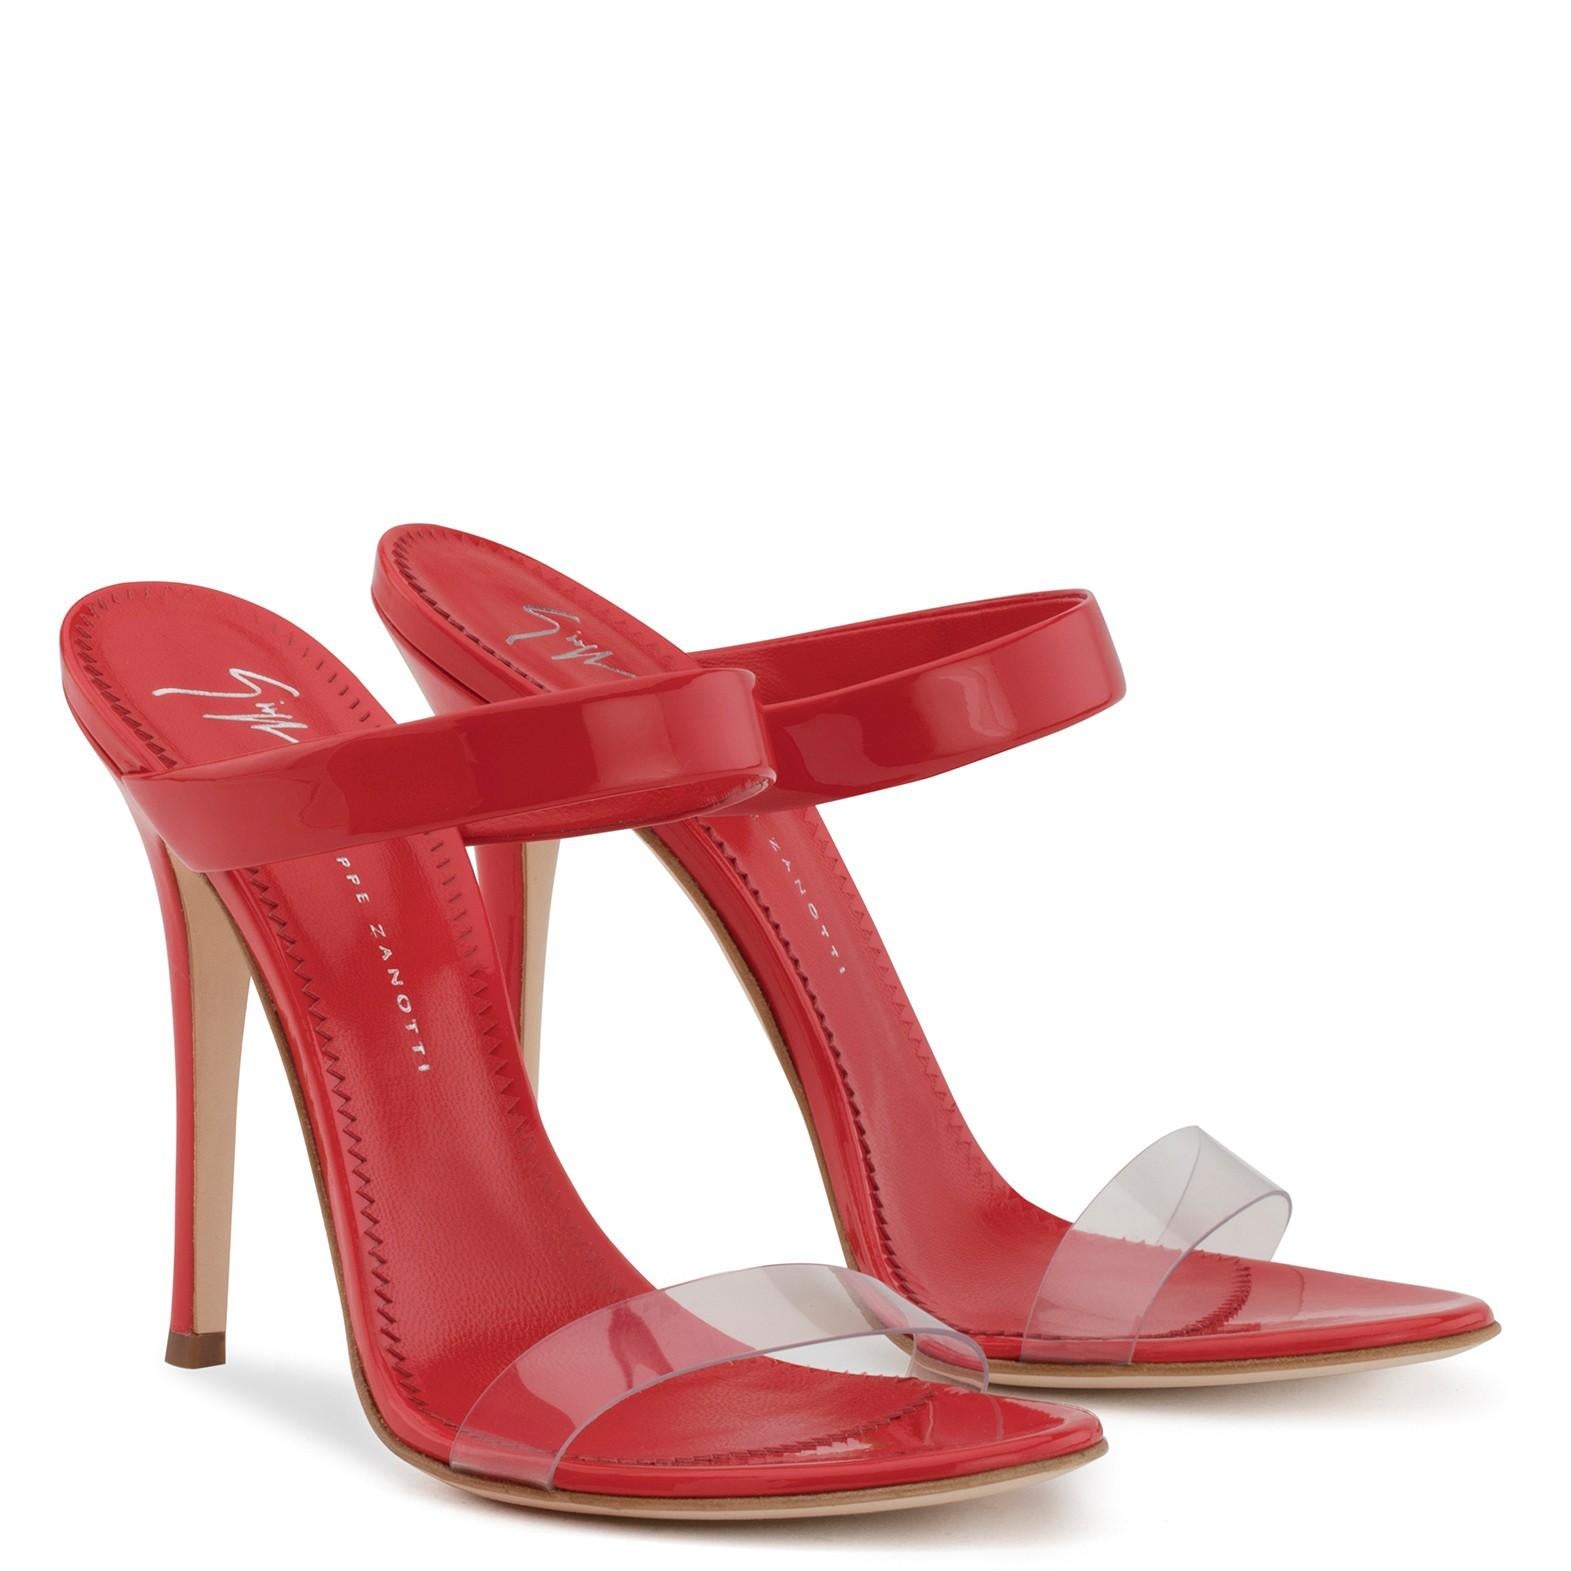 Giuseppe Zanotti NEW Red Patent Leather Clear PVC Slides Mules Heels in Box

Size IT 36
Patent leather
PVC
Made in Italy
Measures 4.5